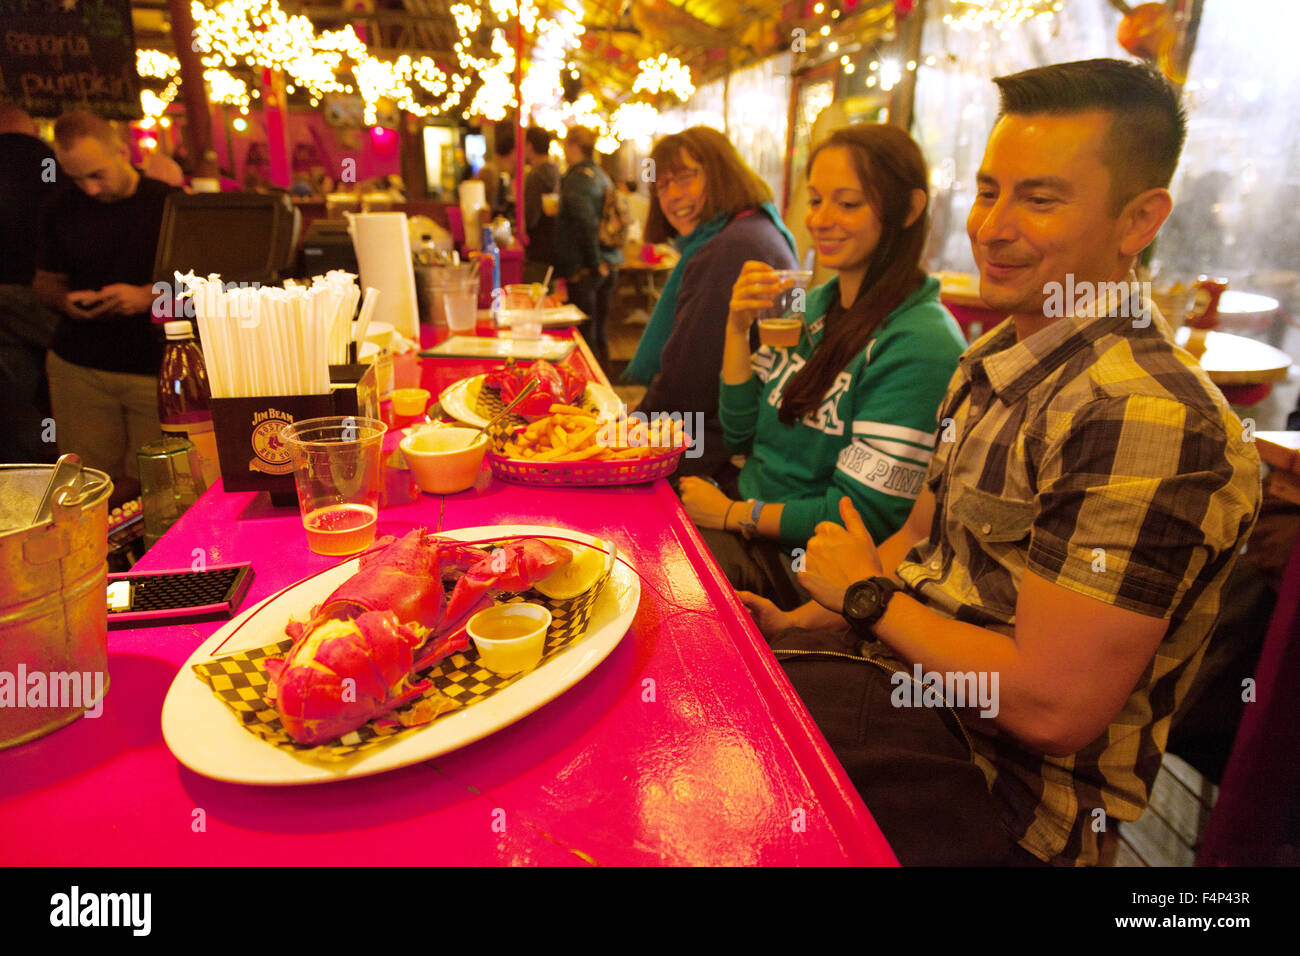 People eating lobster meal, The Barking Crab restaurant, Boston Massachusetts New England, USA Stock Photo